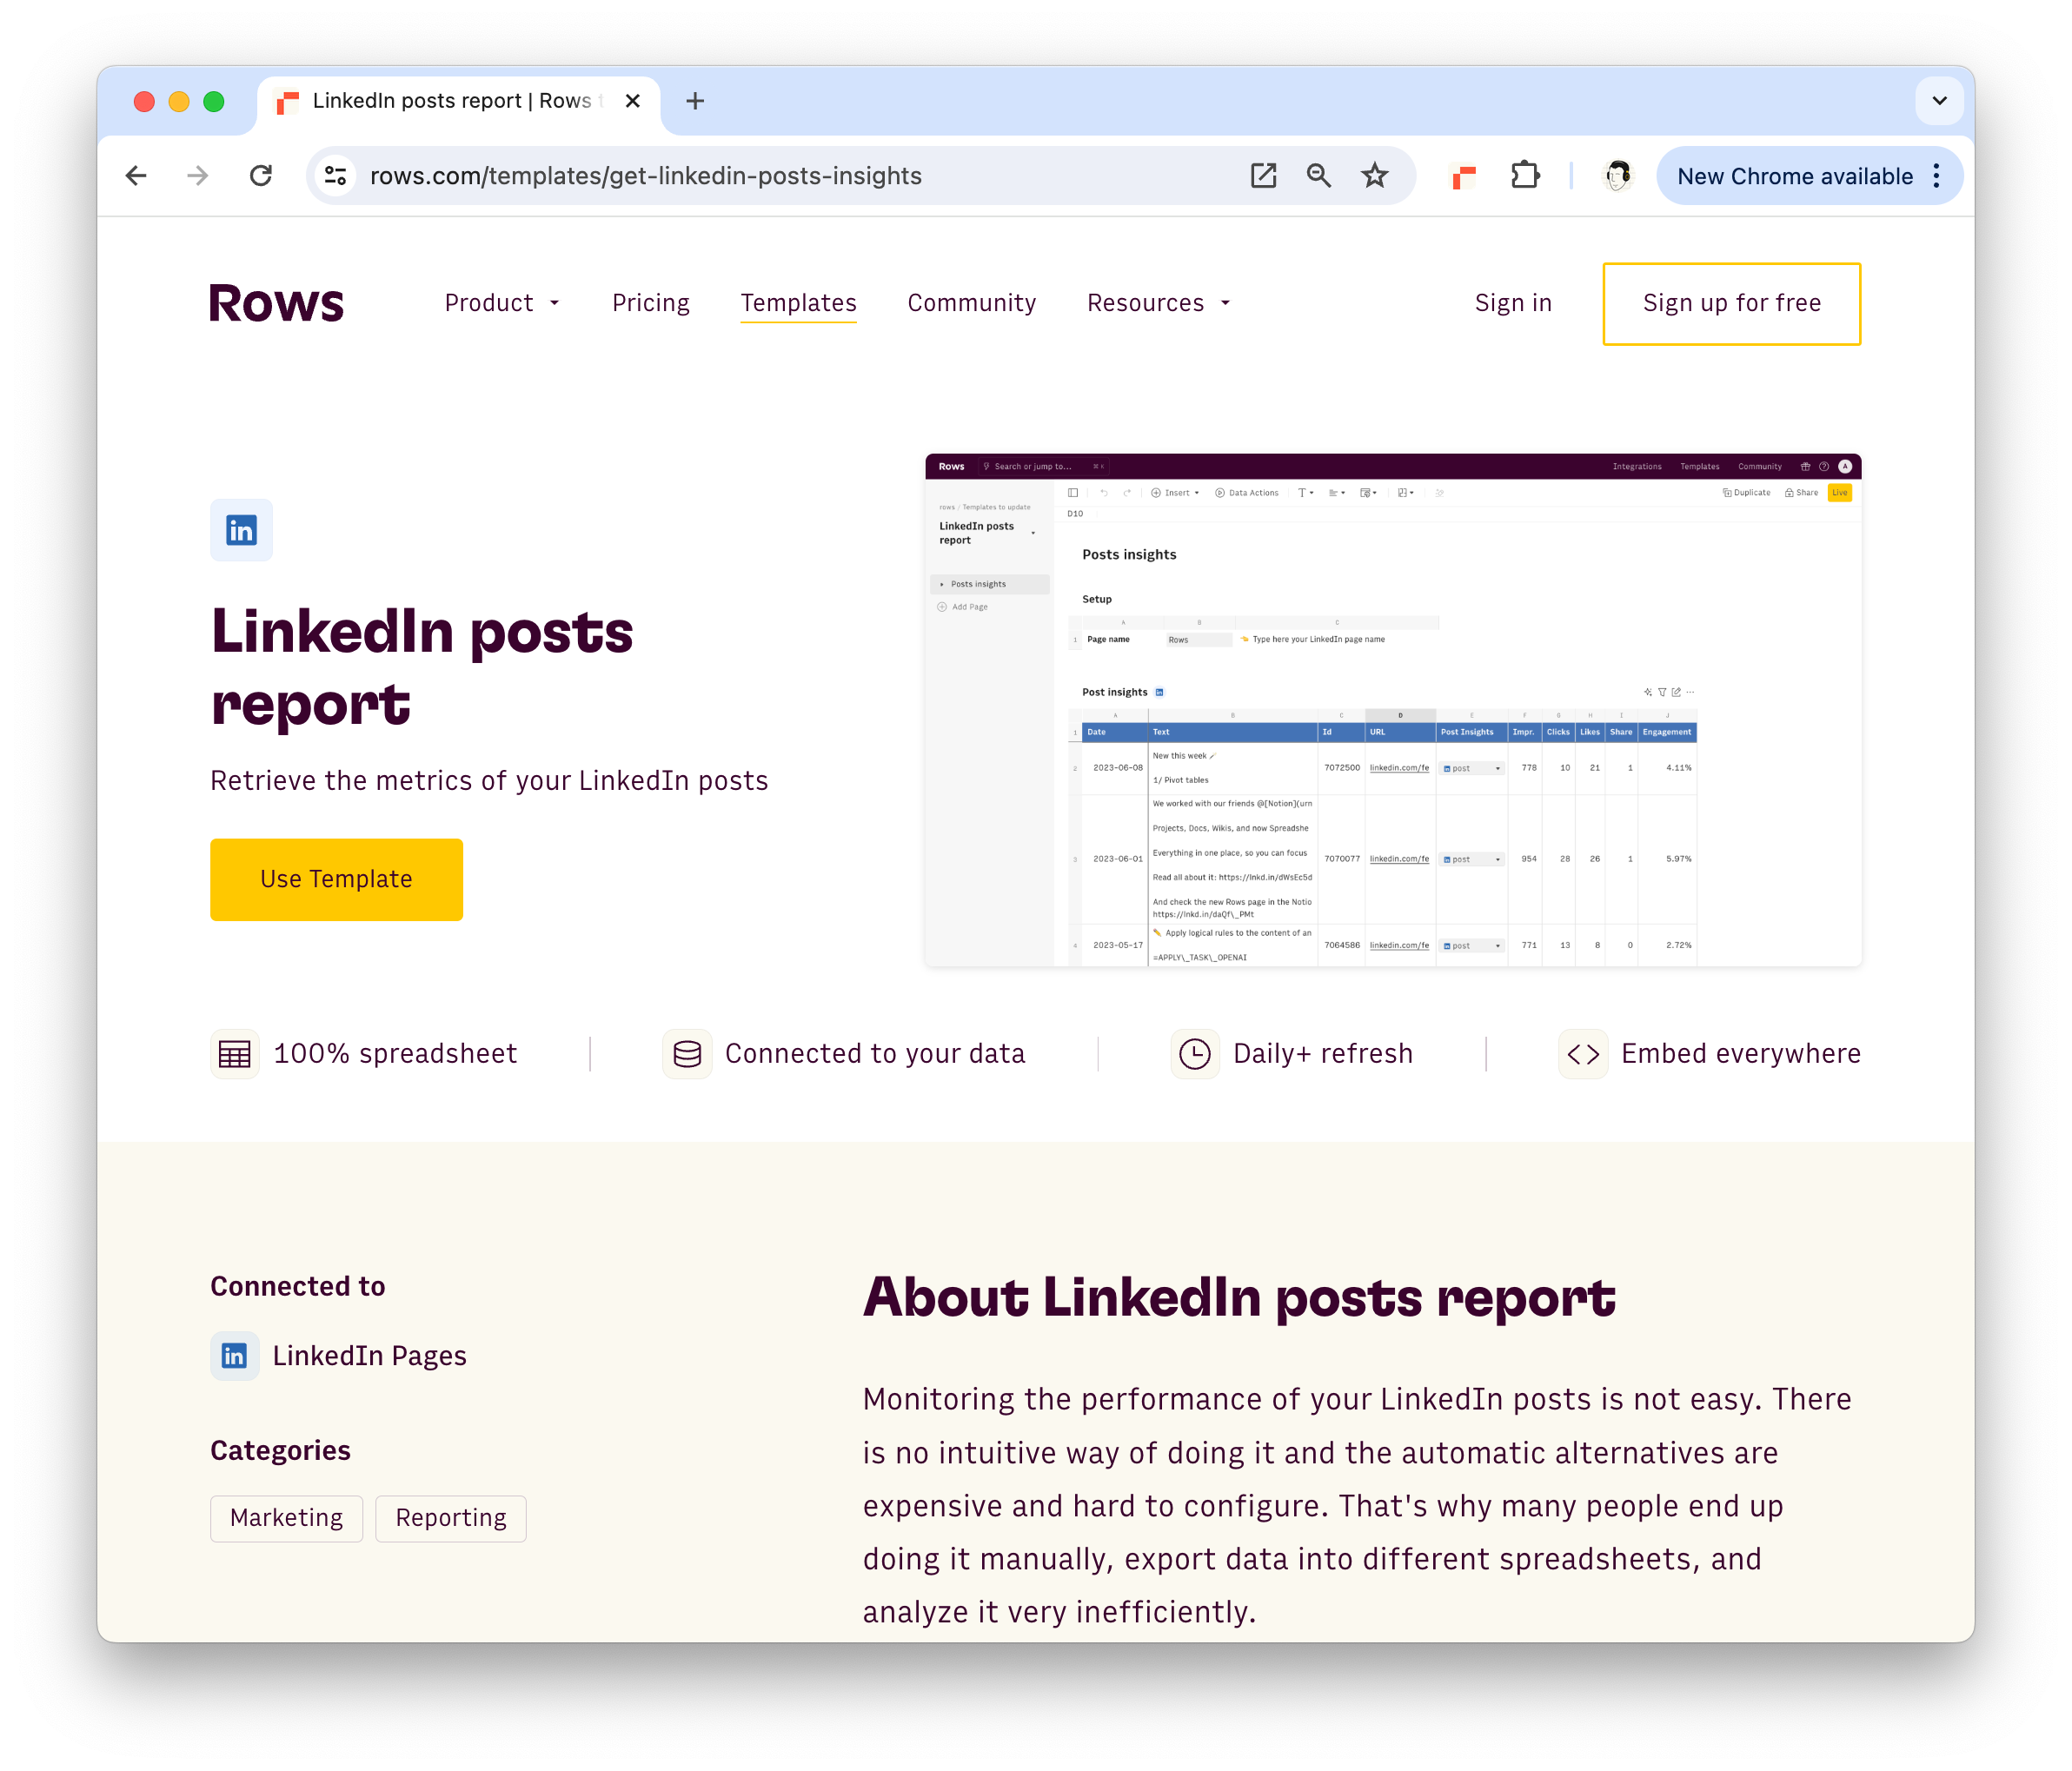 The LinkedIn posts report template